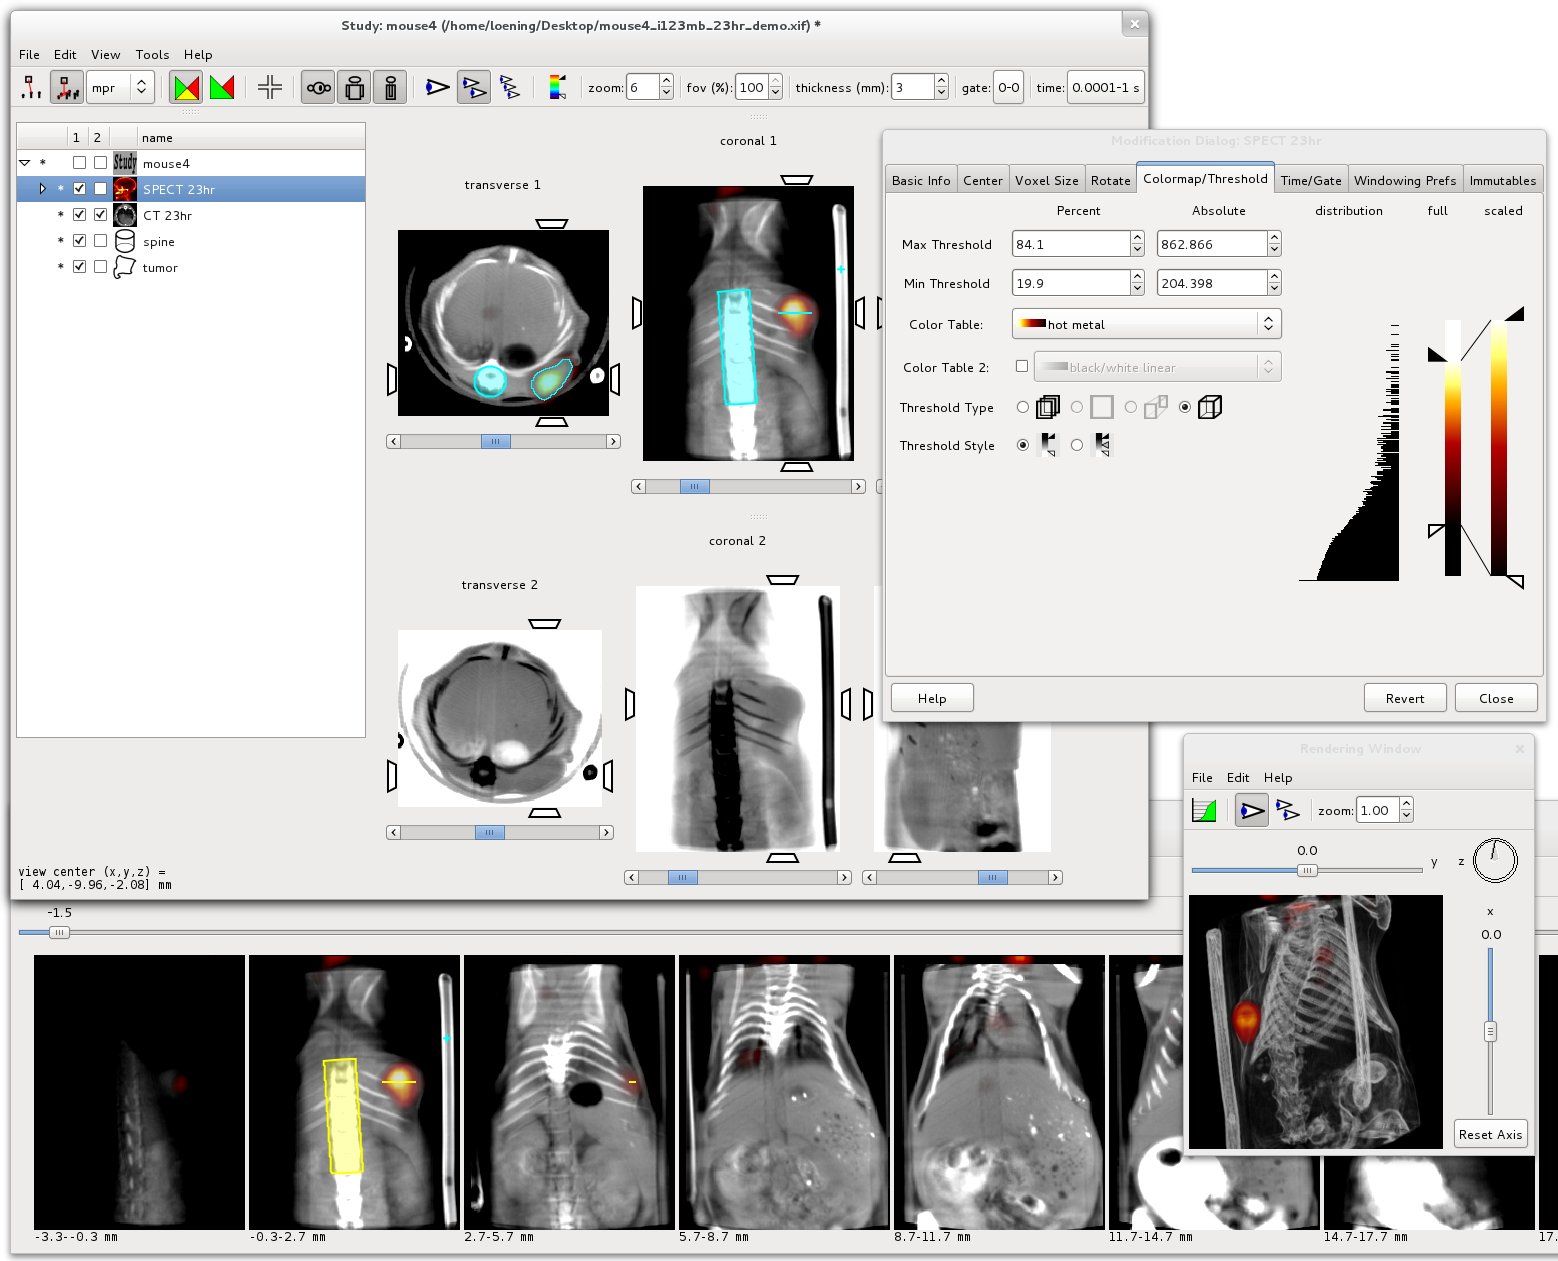 free xray viewer for mac os 10.7.5